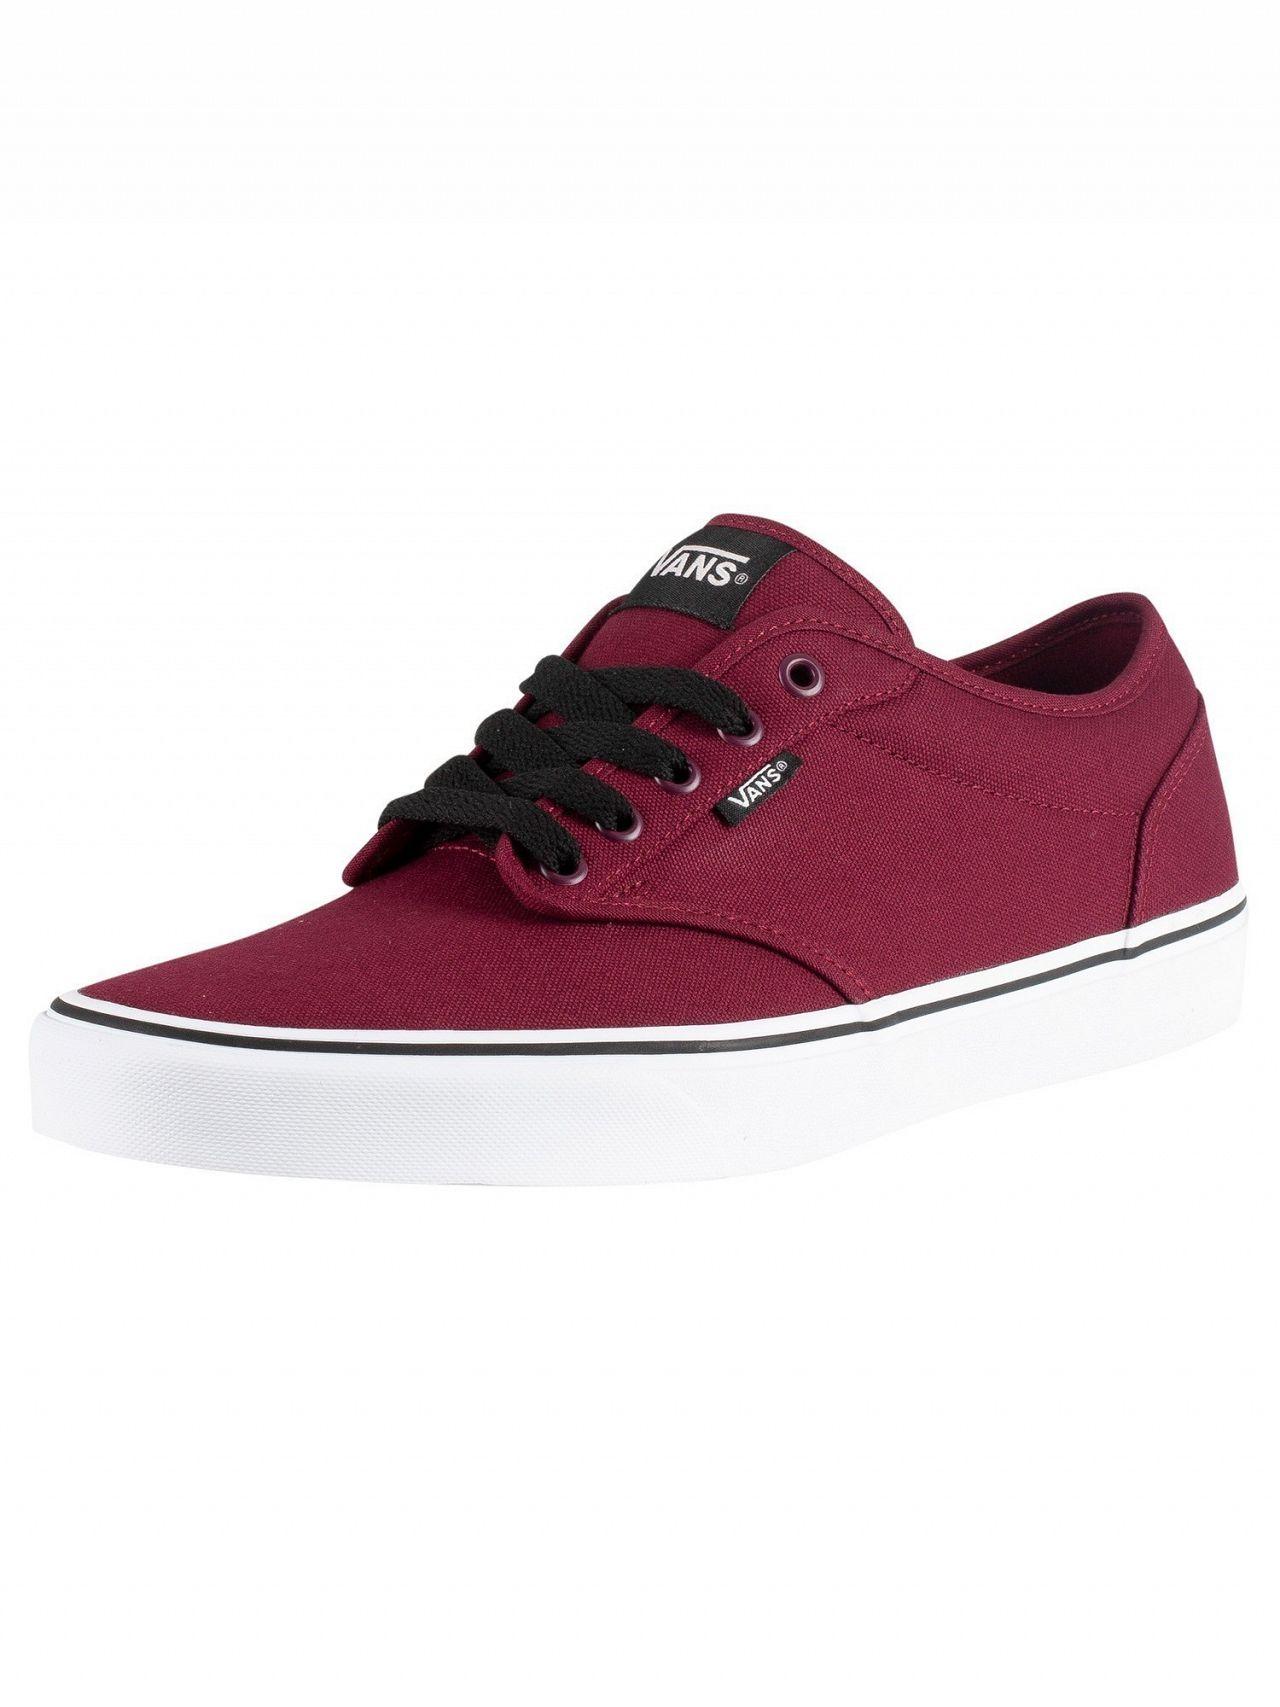 Vans Oxblood/white Atwood Canvas Trainers in Red for Men - Lyst